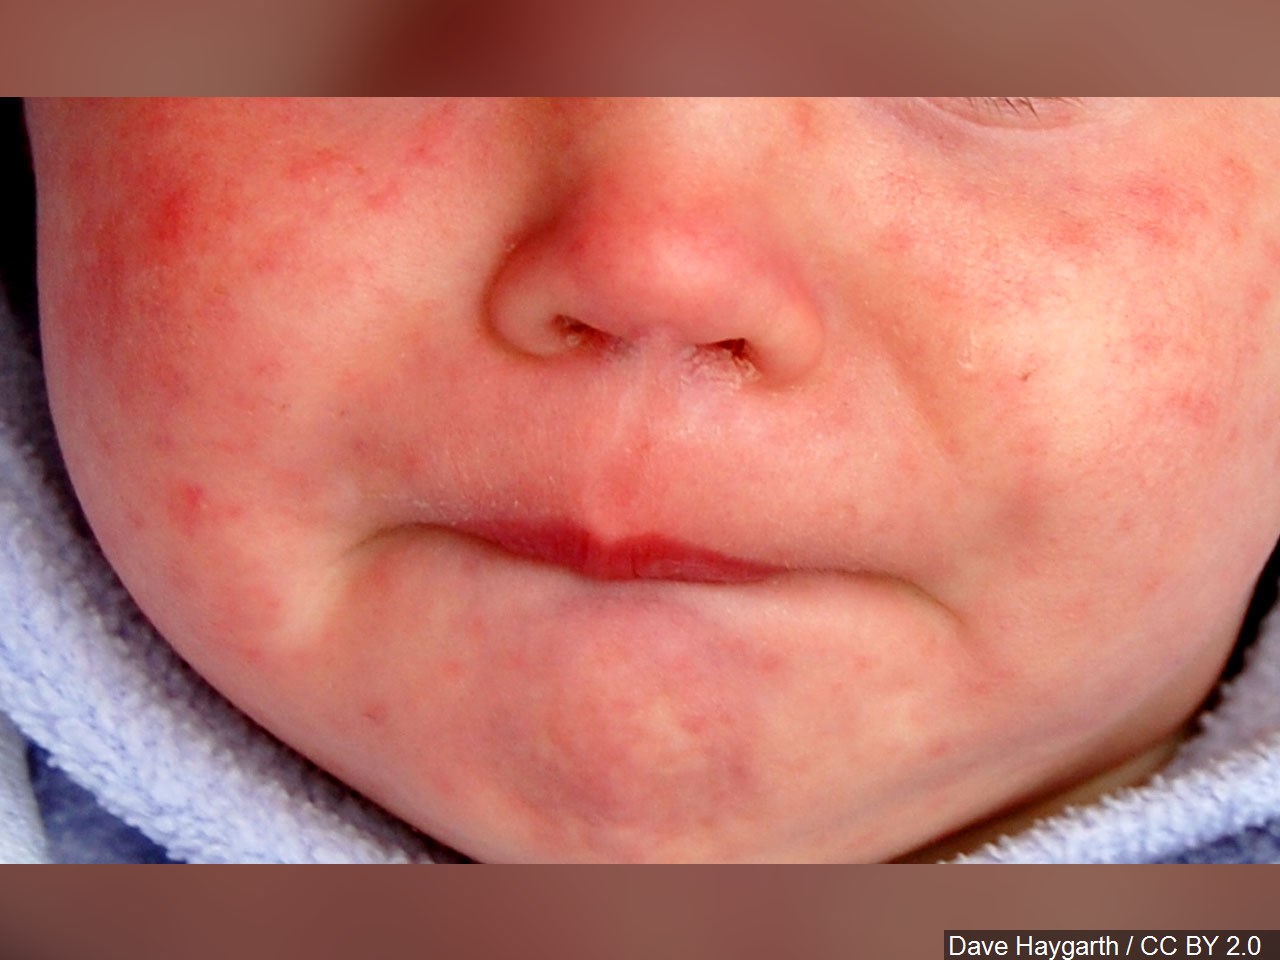 Confirmed case of measles in St. Clair County infant